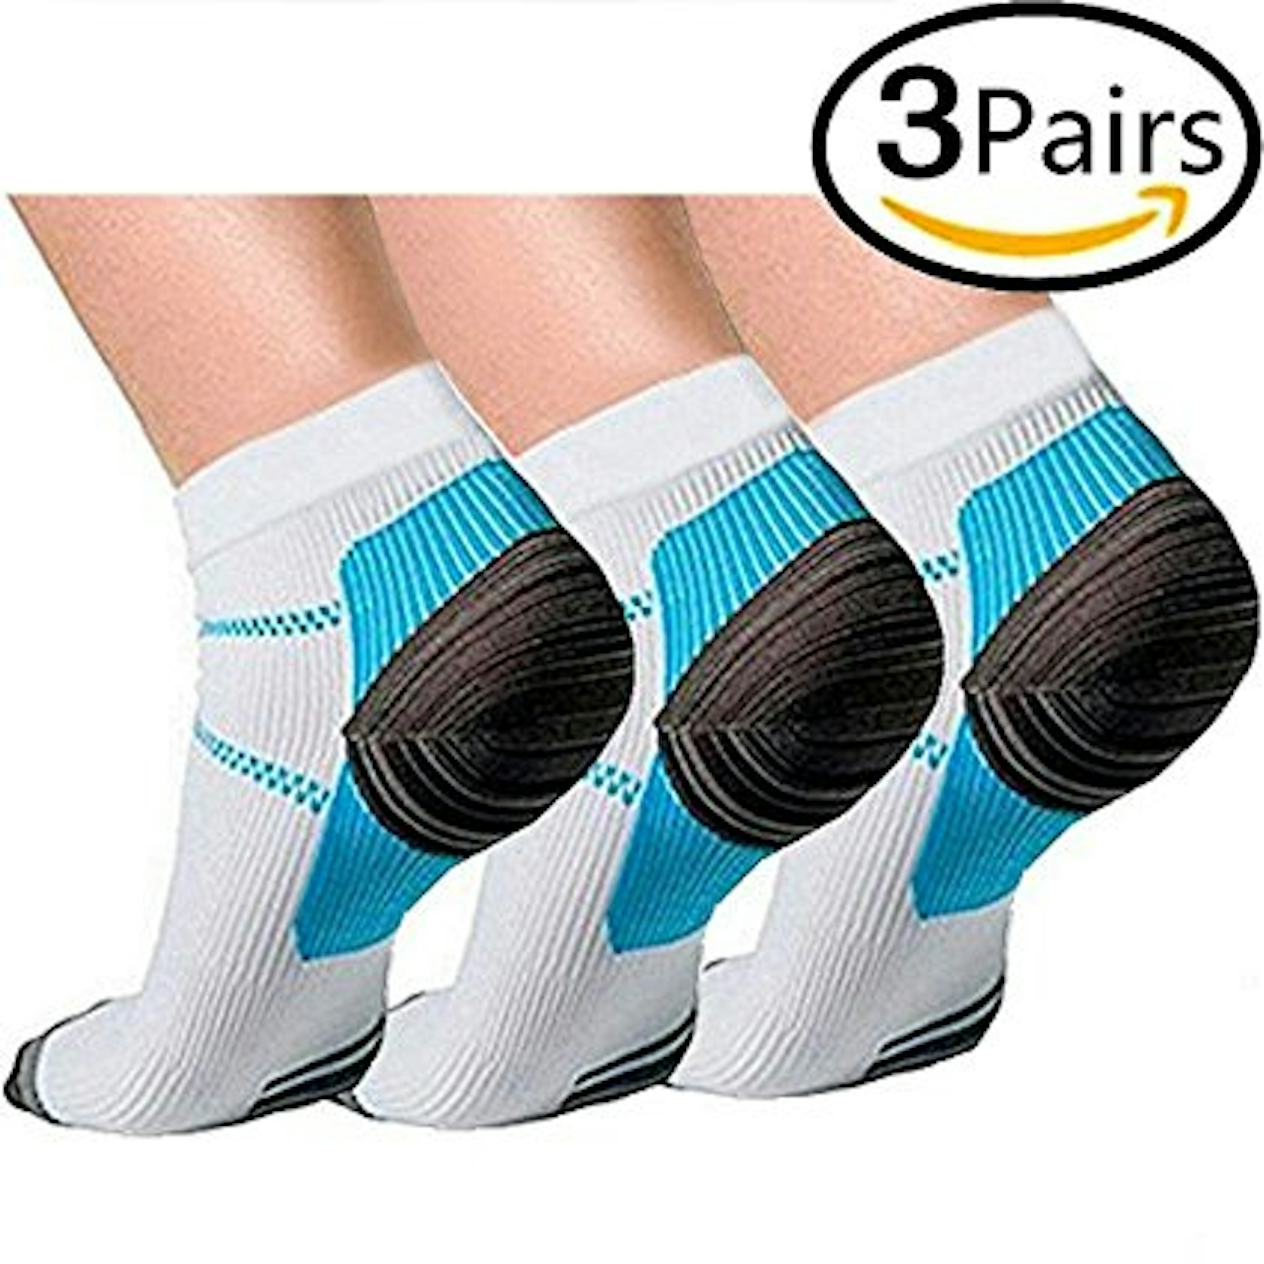 The 7 Best Socks With Arch Support